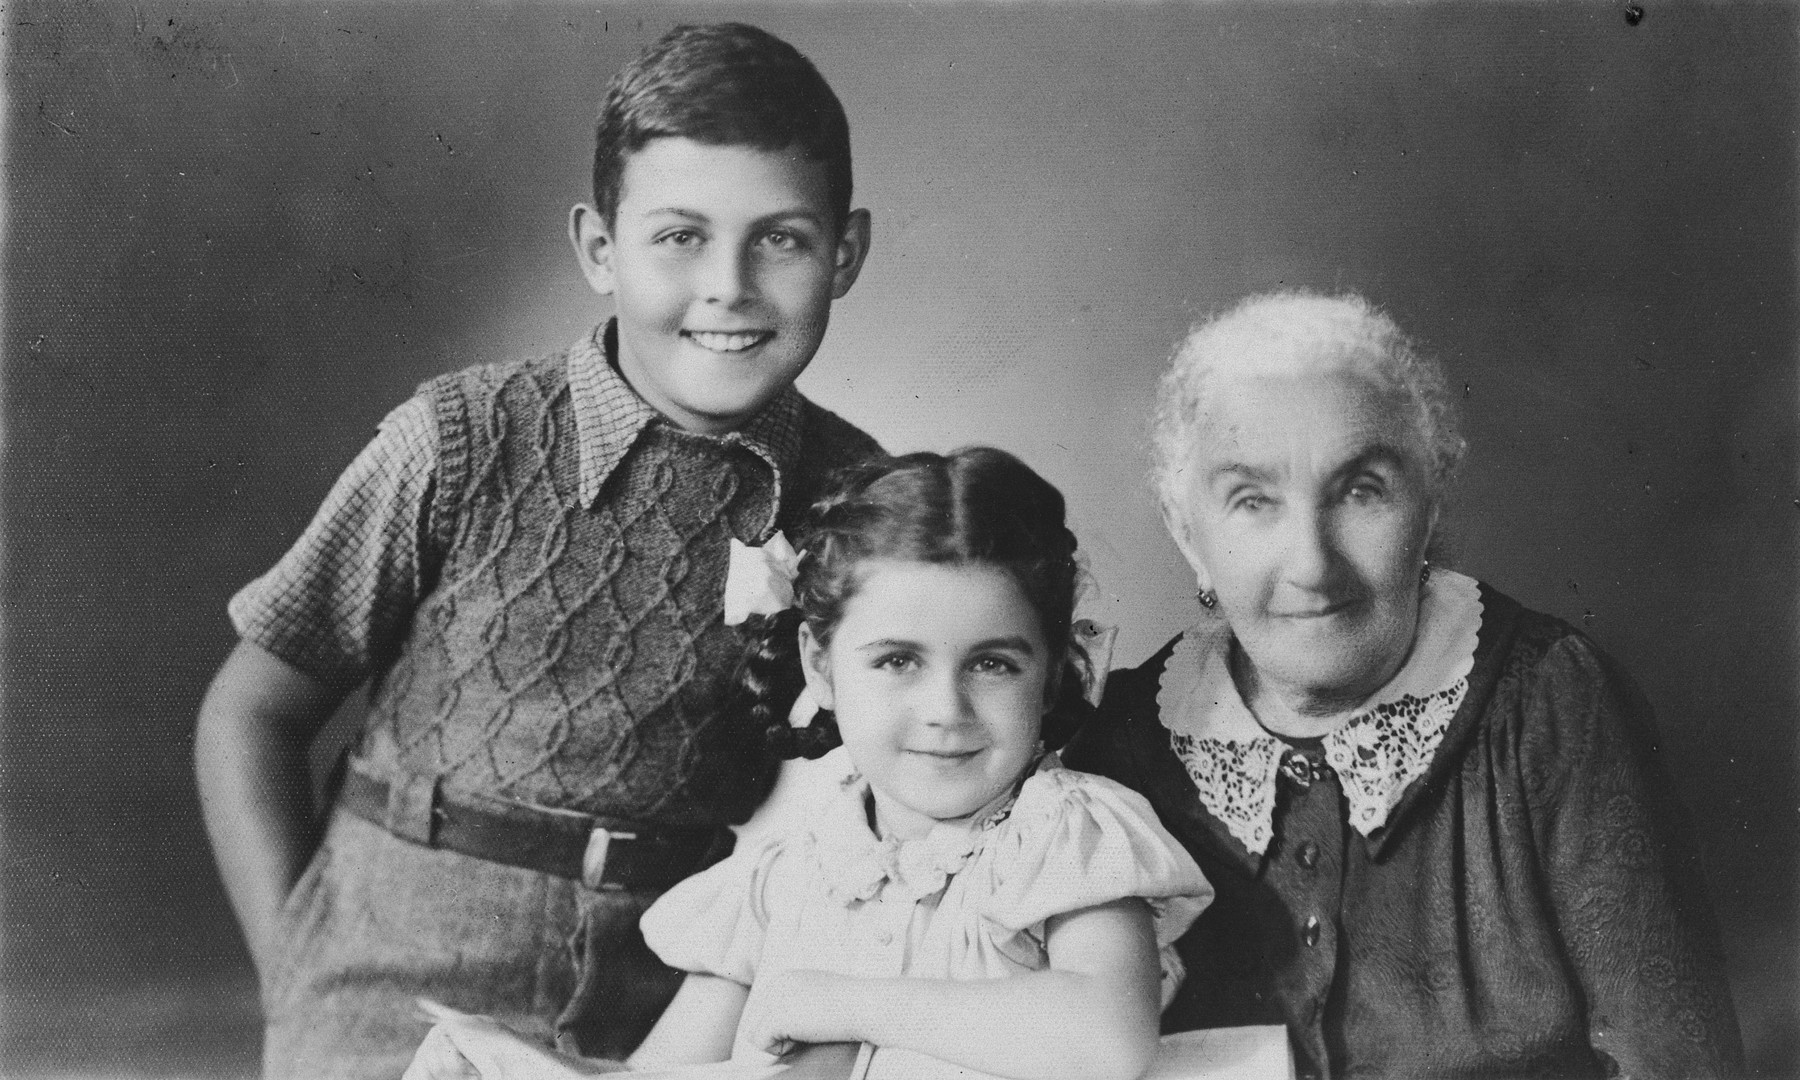 Portrait of the Ponevejsky family in Shanghai.

Pictured is the mother of Anatole Ponevejsky together with Greg and Mona, the children of his sister.